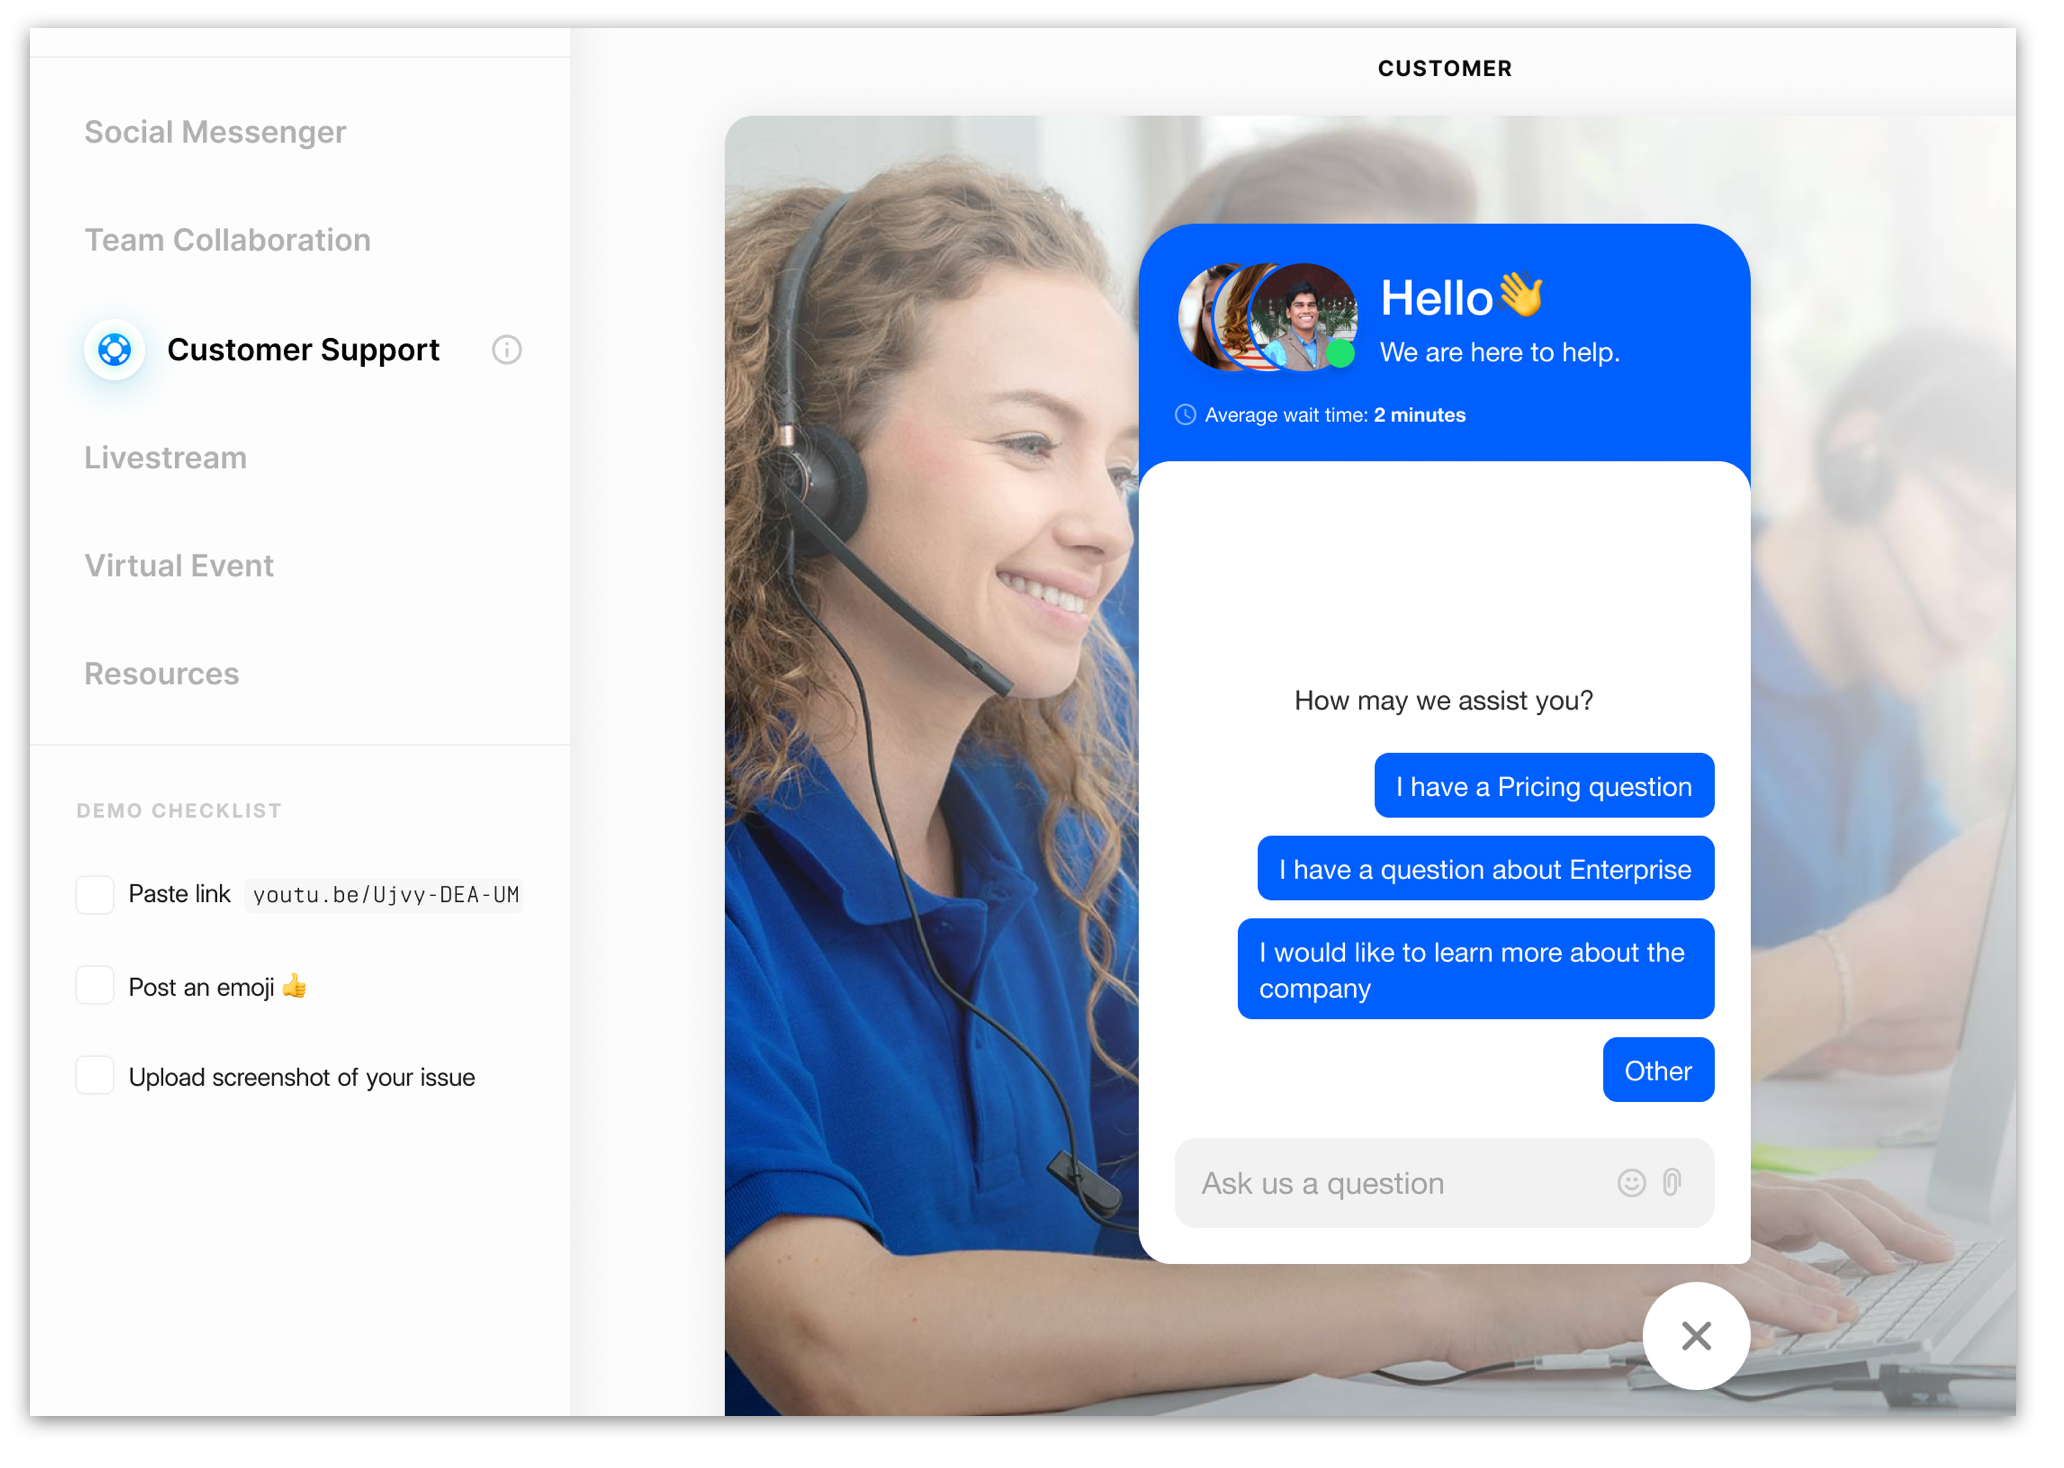 Live chat AI-powered bot helps users find information quickly